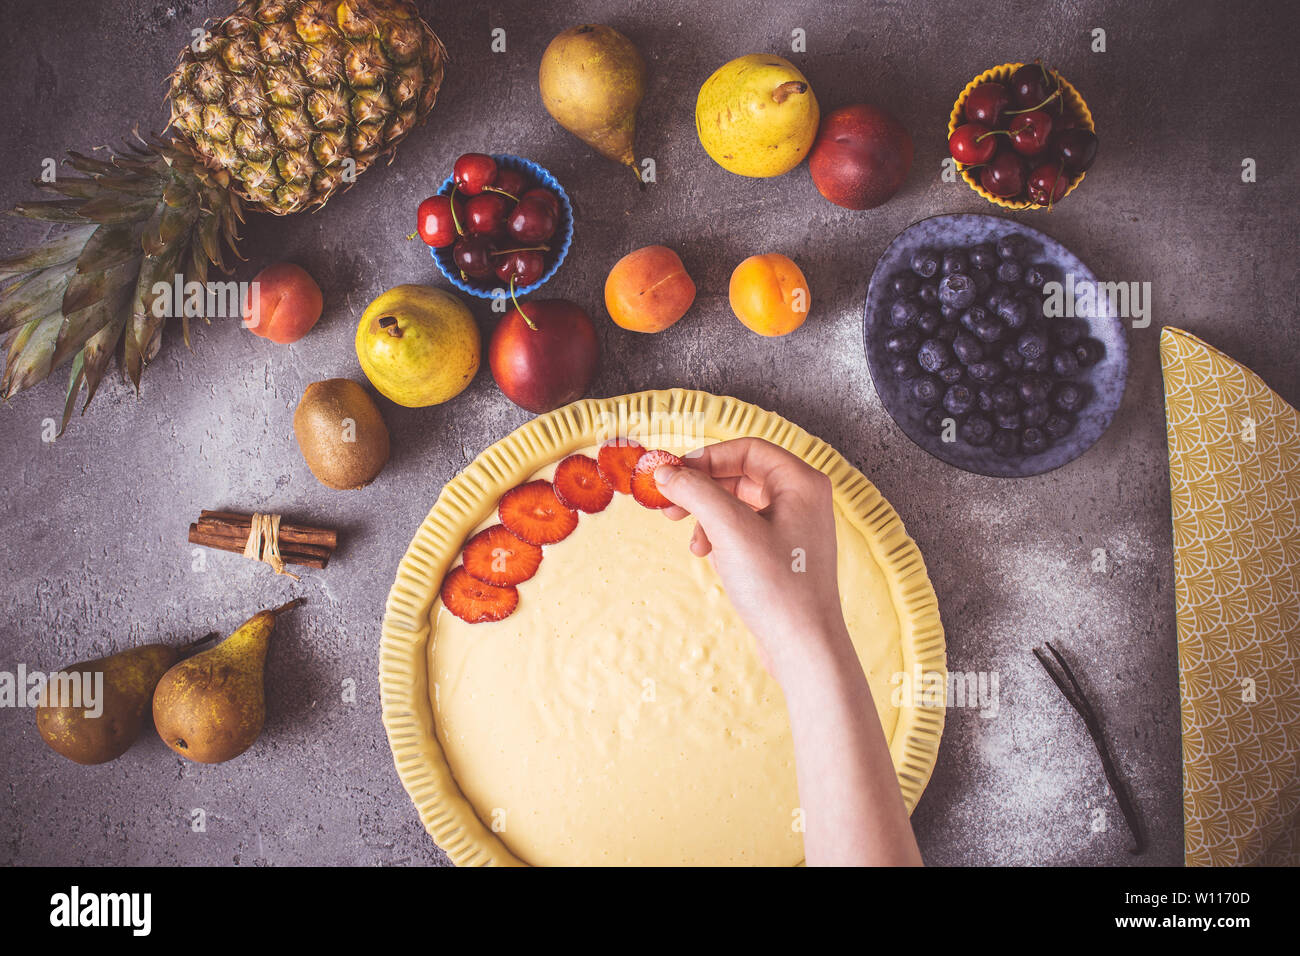 Female Hands Prepare Fruit Pie with Colorful Fruits and Fresh Dough. Healthy Food Concept. Stock Photo